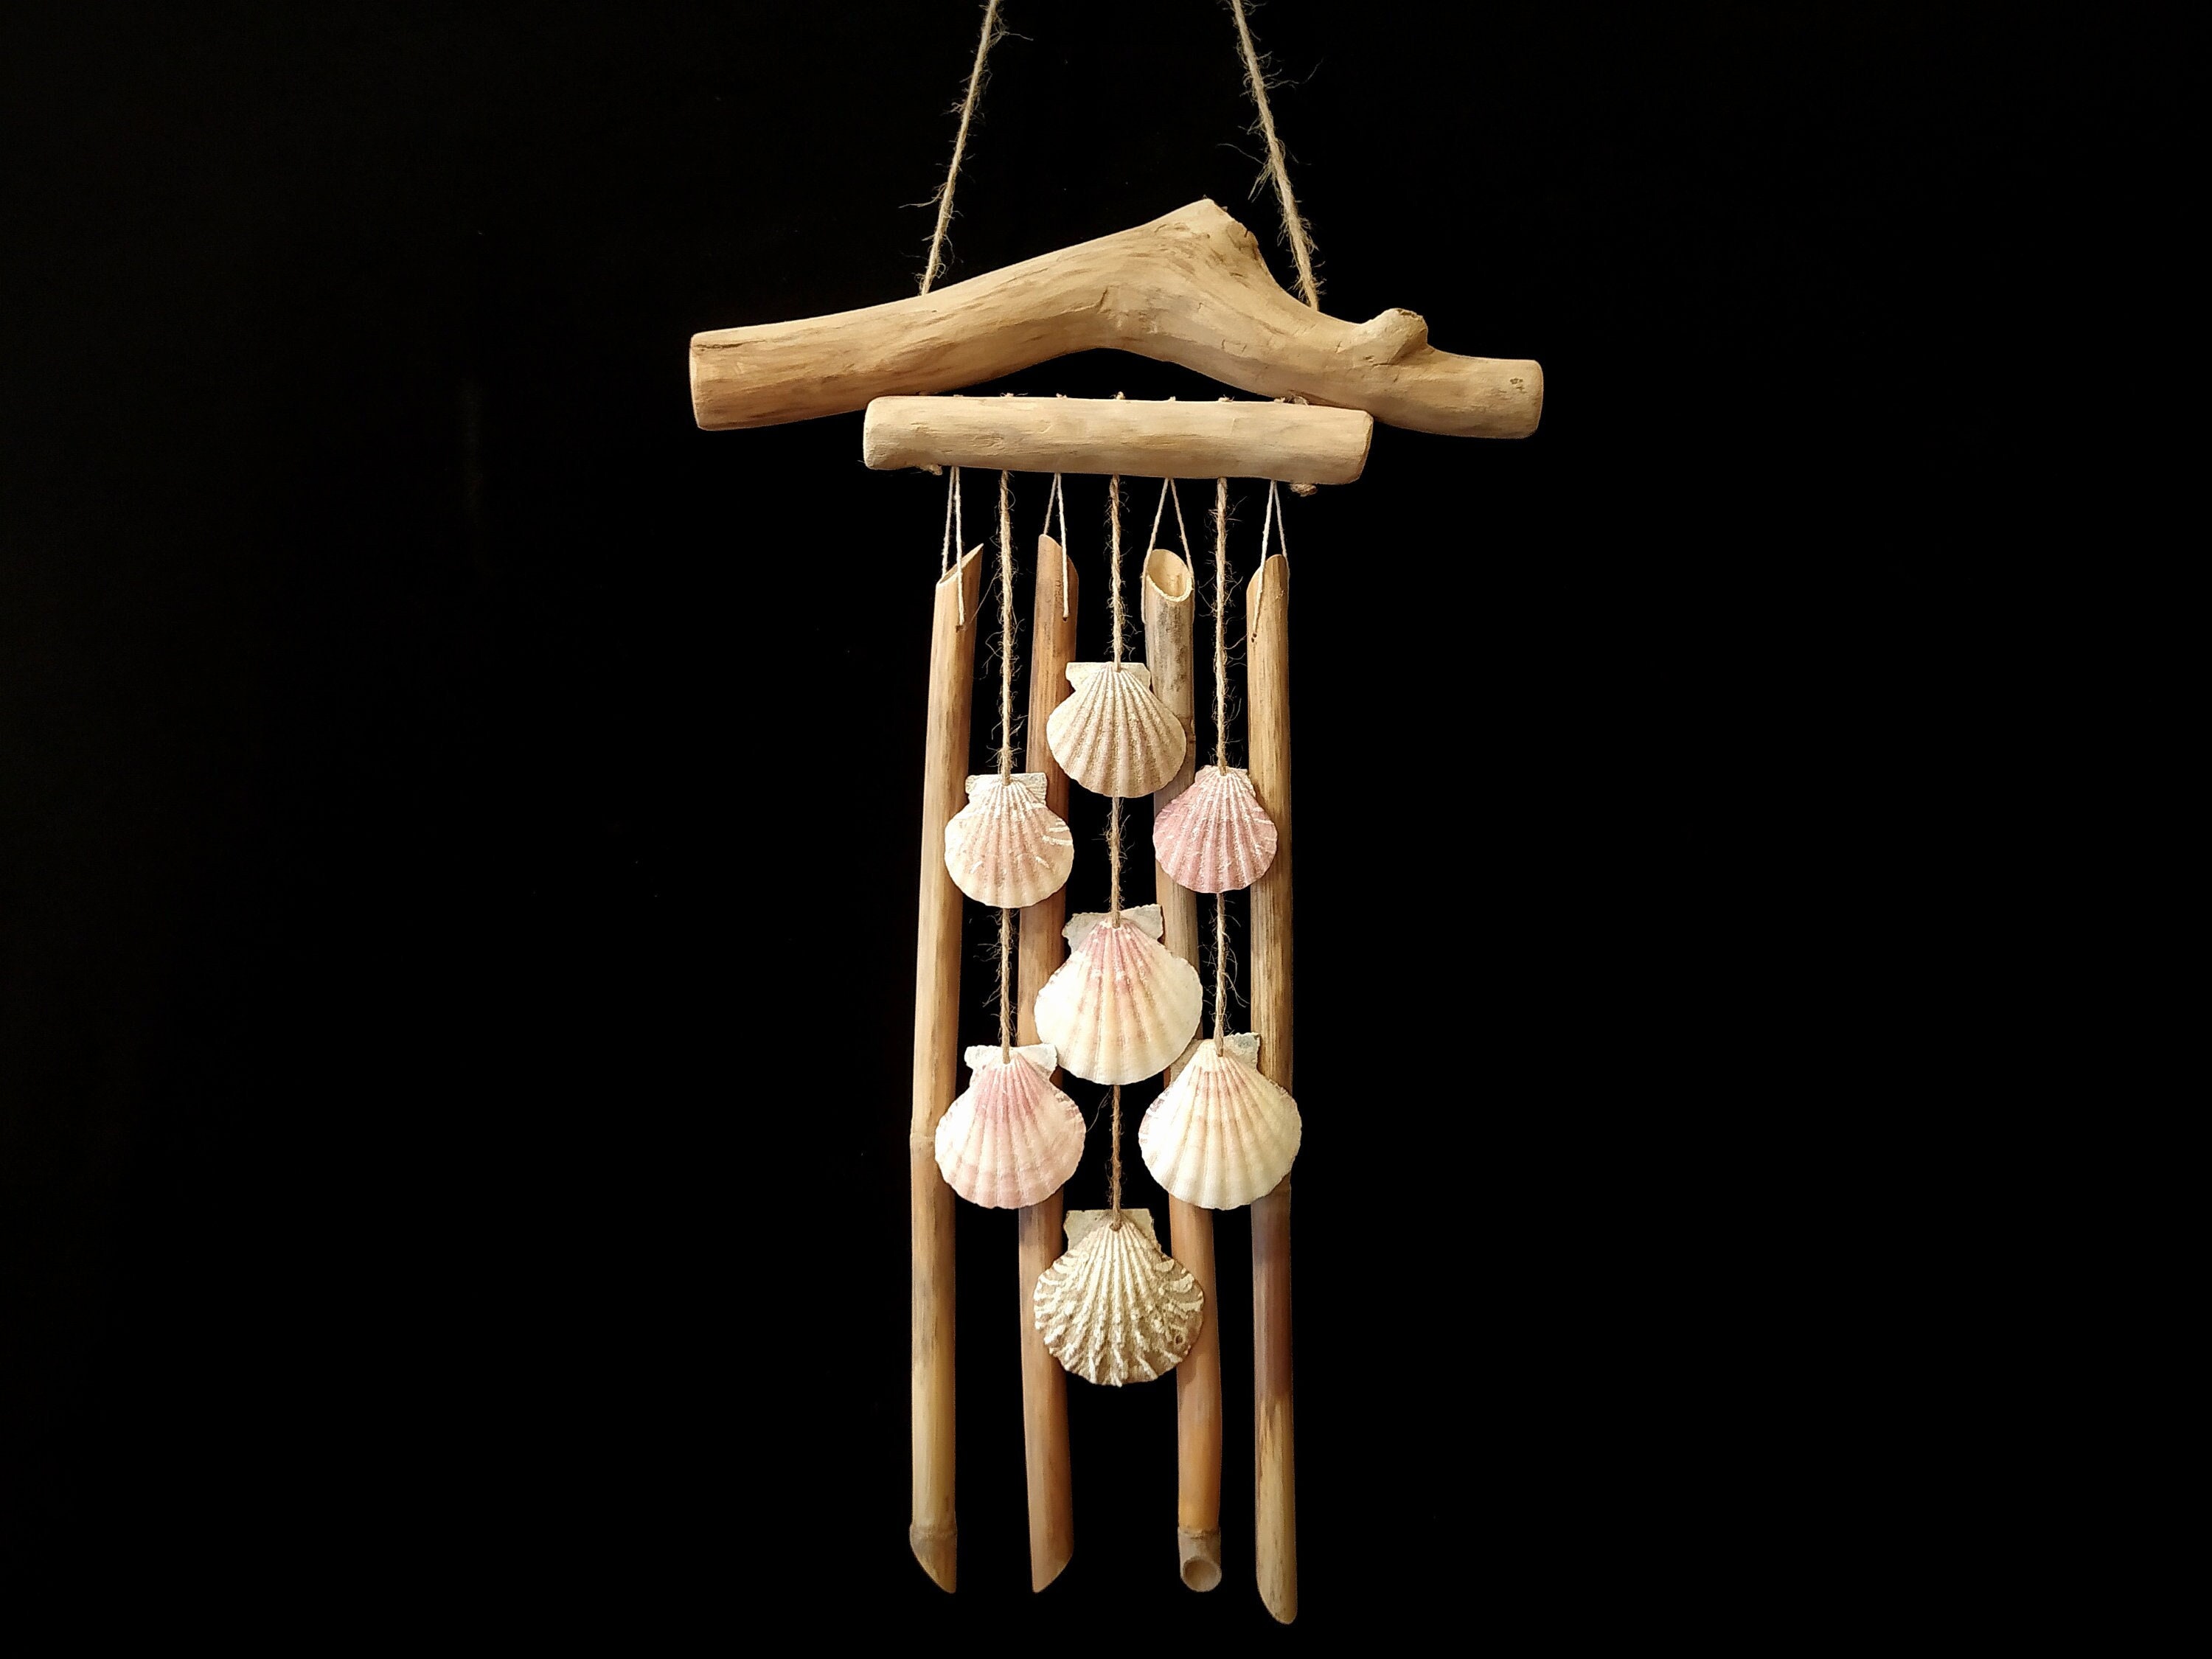 Bamboo Sticks ,9 Bamboo for Crafts,windchime Parts, Wind Chime